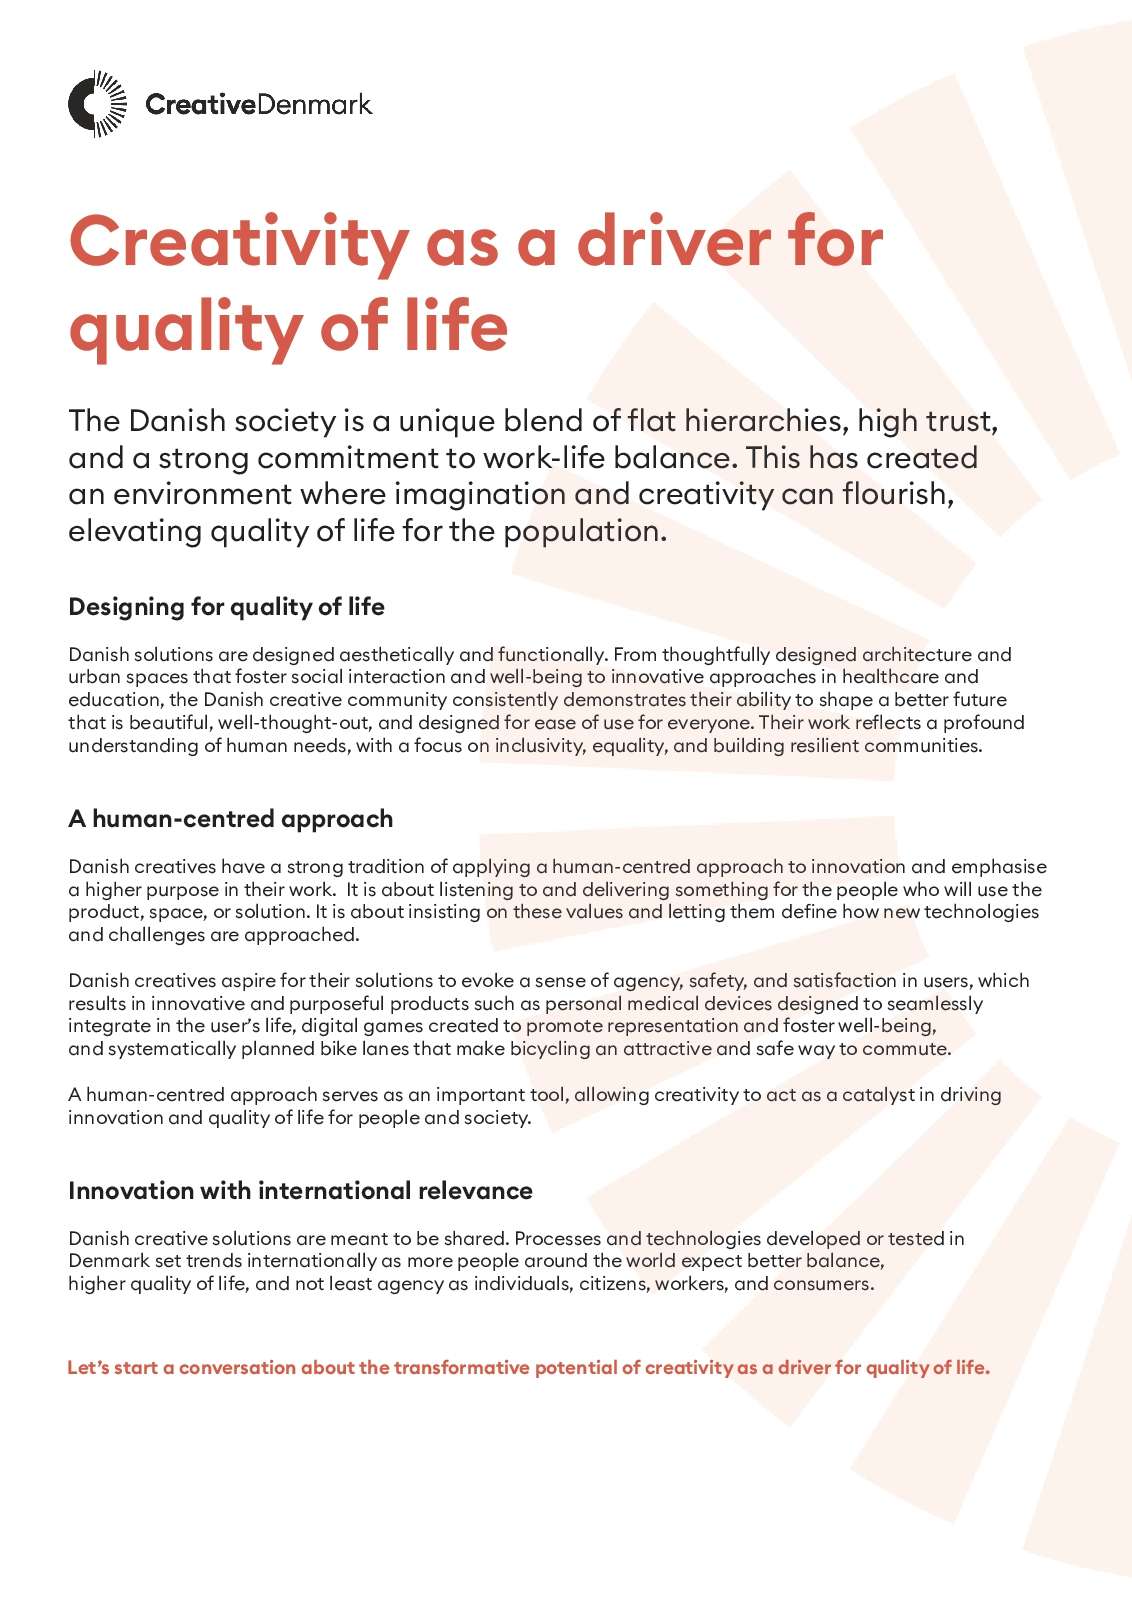 Creativity as a driver for quality of life